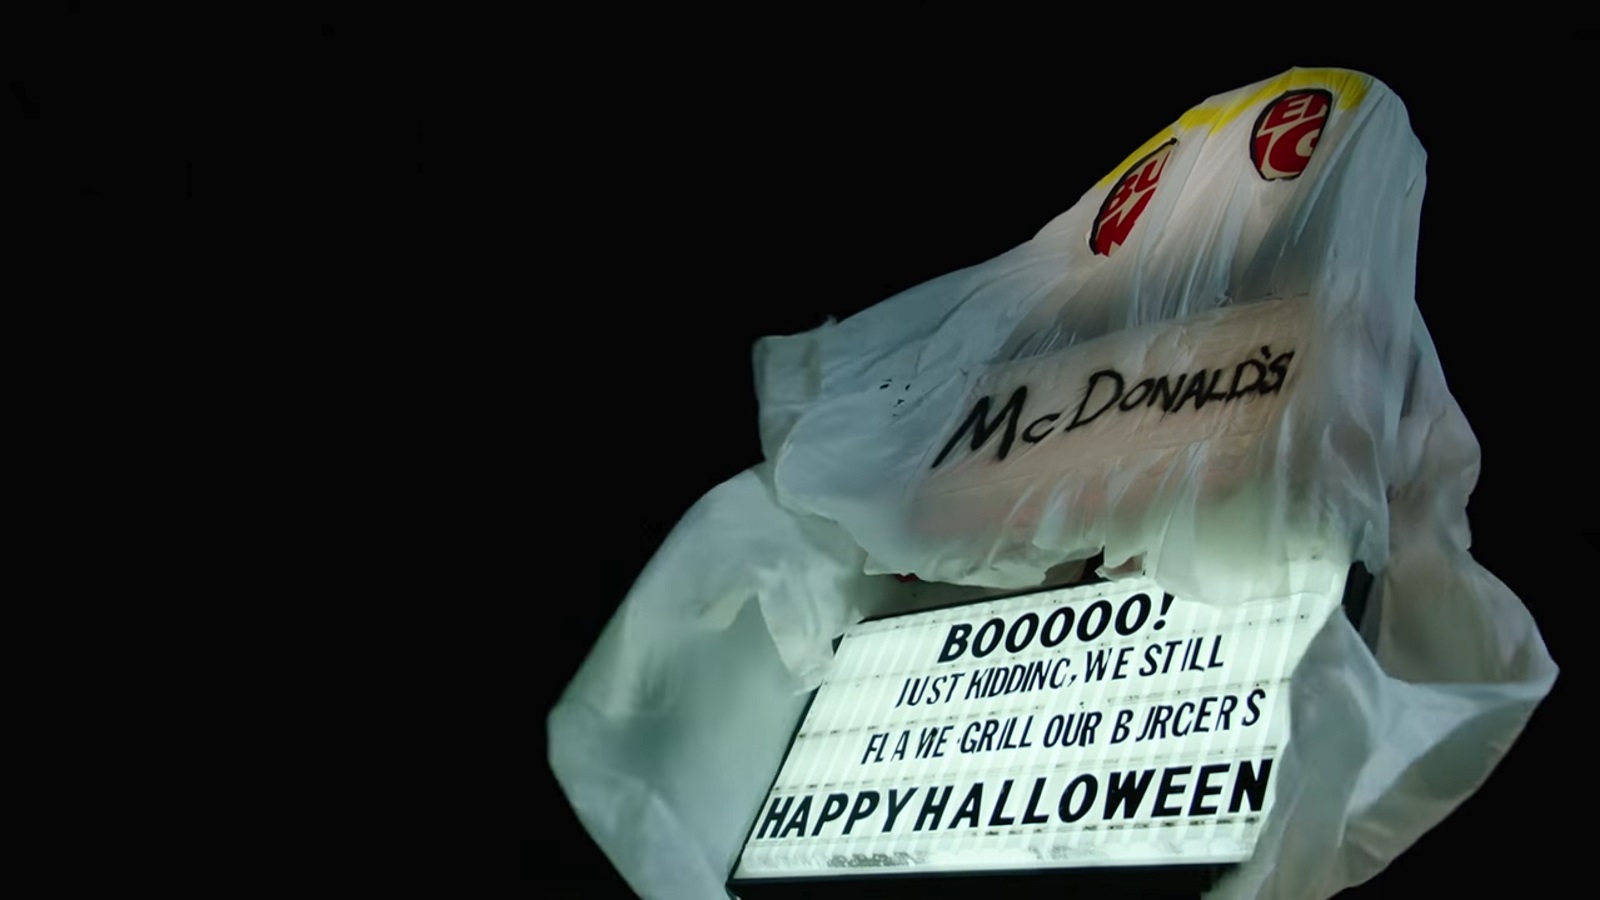 Burger King Brings Their A-Game for Halloween Dressed as McDonald’s Ghost